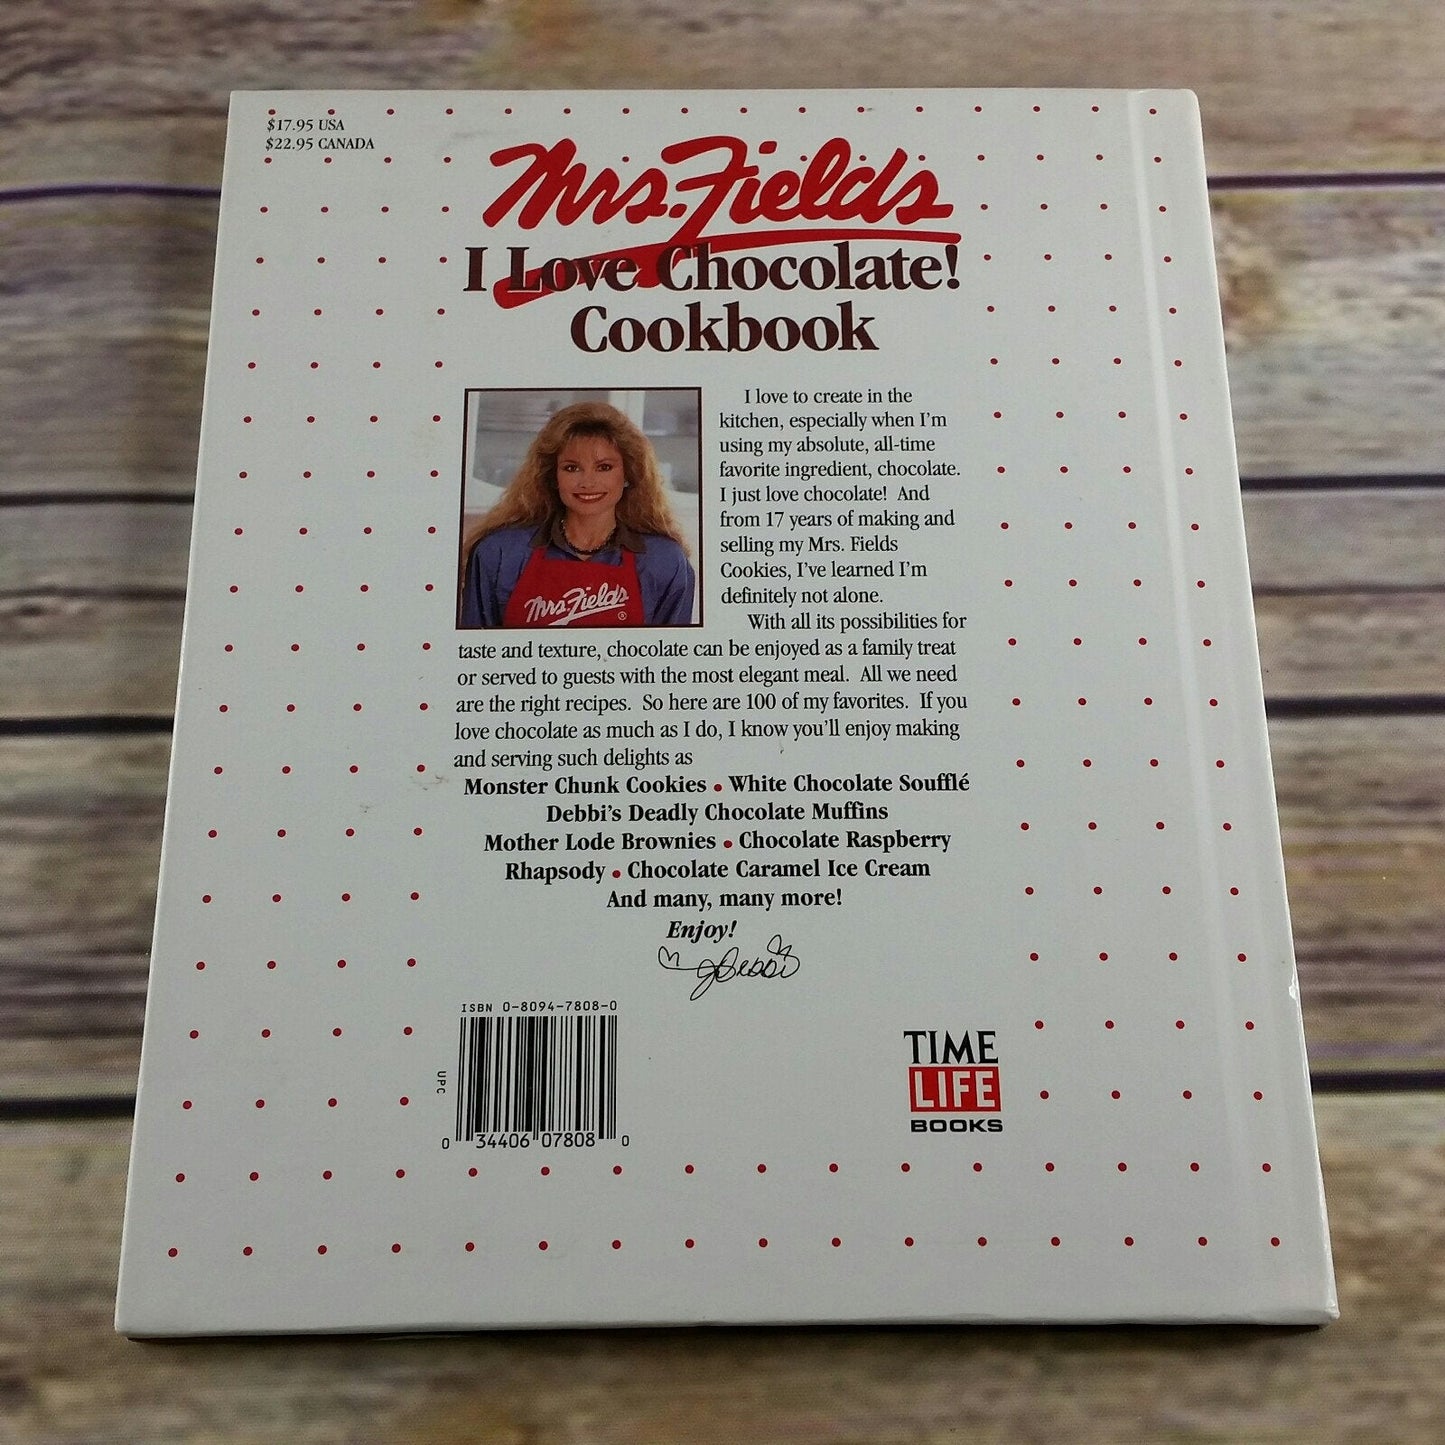 Vintage Cookbook Mrs Fields I Love Chocolate 100 Recipes Hardcover Book 1994 Debbie Fields Time Life Books First Print Desserts